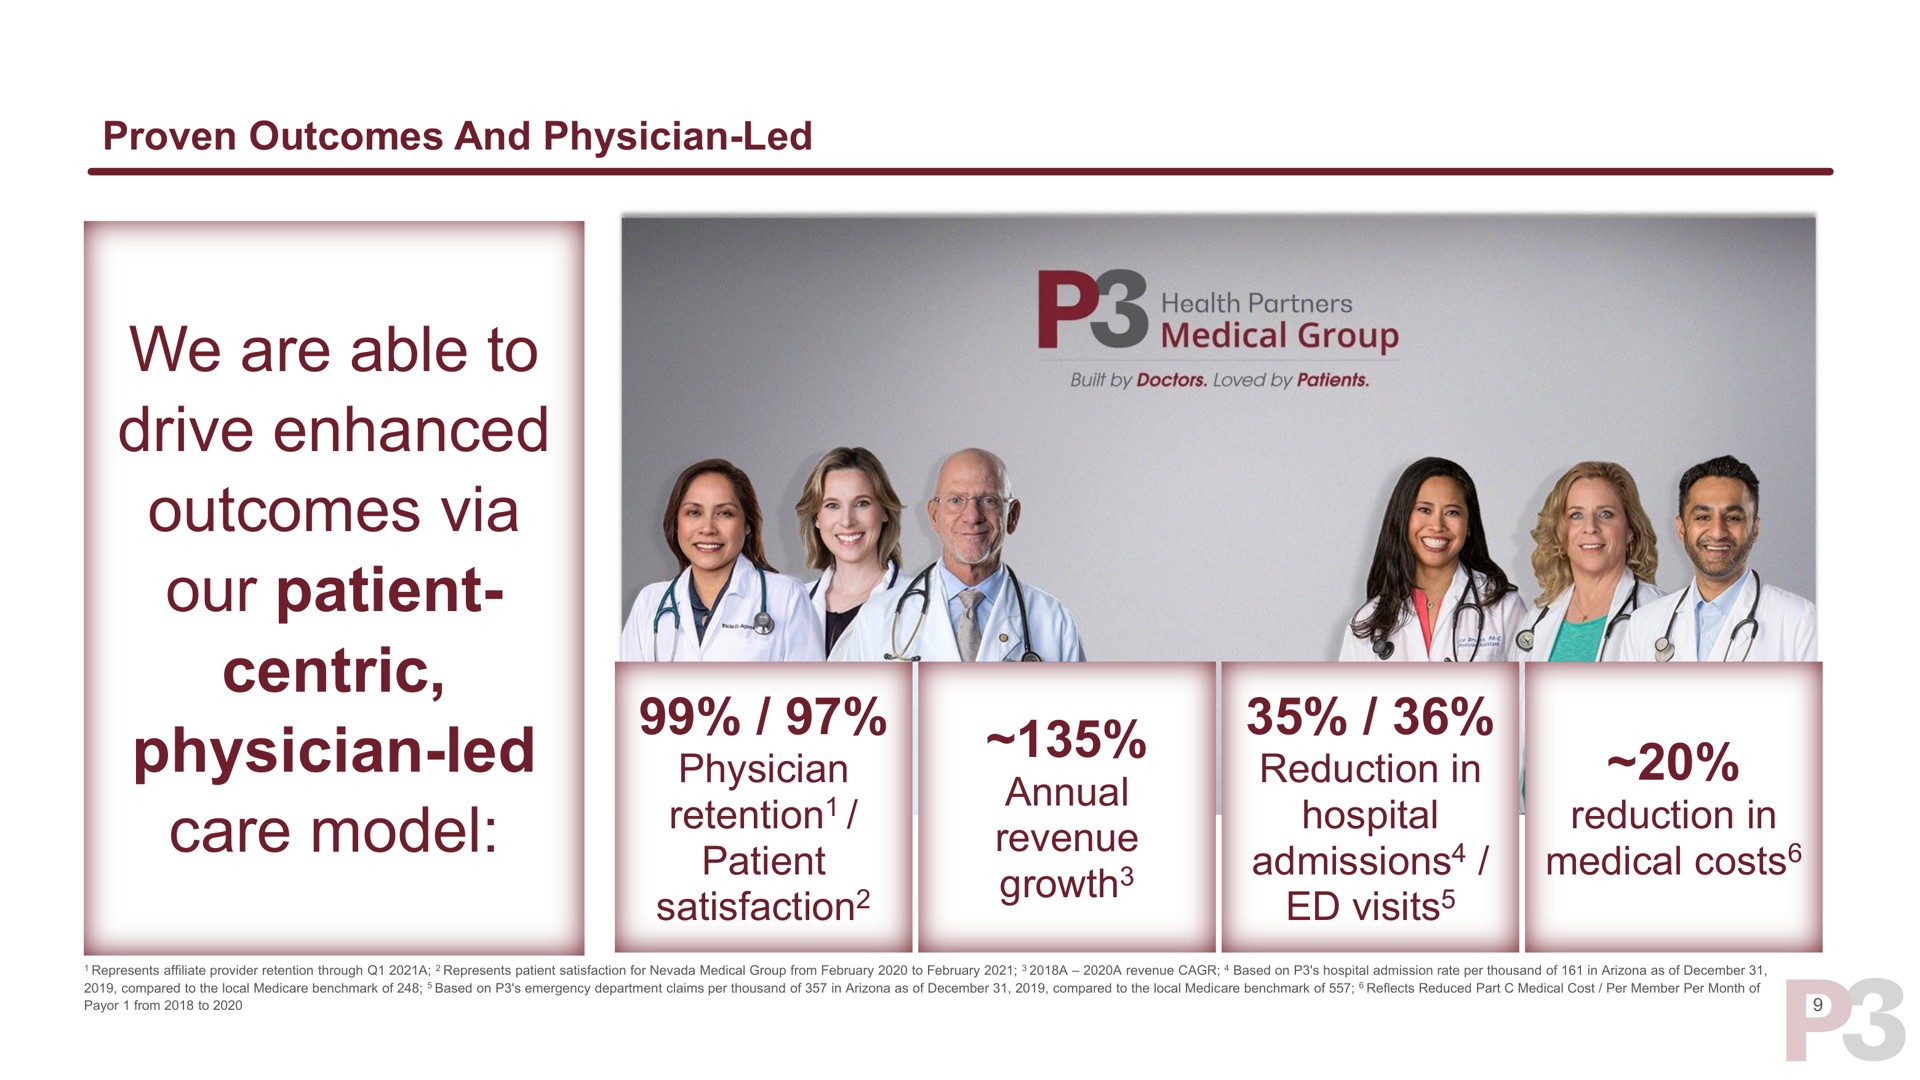 proven outcomes and physician led we are able to drive enhanced outcomes via our patient centric physician led care model physician retention patient satisfaction annual revenue growth reduction in hospital admissions visits reduction in medical costs costs retention satisfaction admissions visits growth | P3 Health Partners